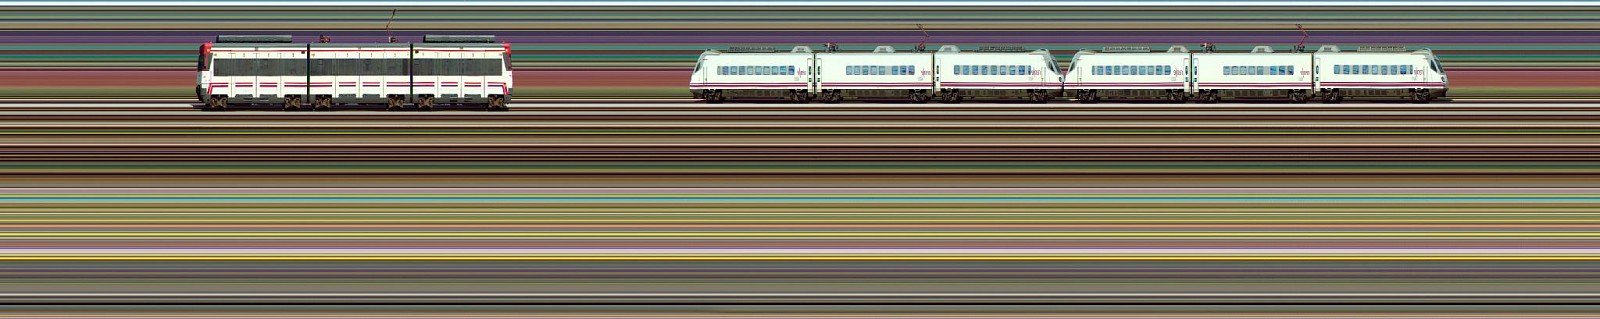 Jay Mark Johnson, VALENCIA TRAINS #1, 2008 Valencia ES
archival pigment on paper, mounted on aluminum, 40 x 180 in. (101.6 x 457.2 cm)